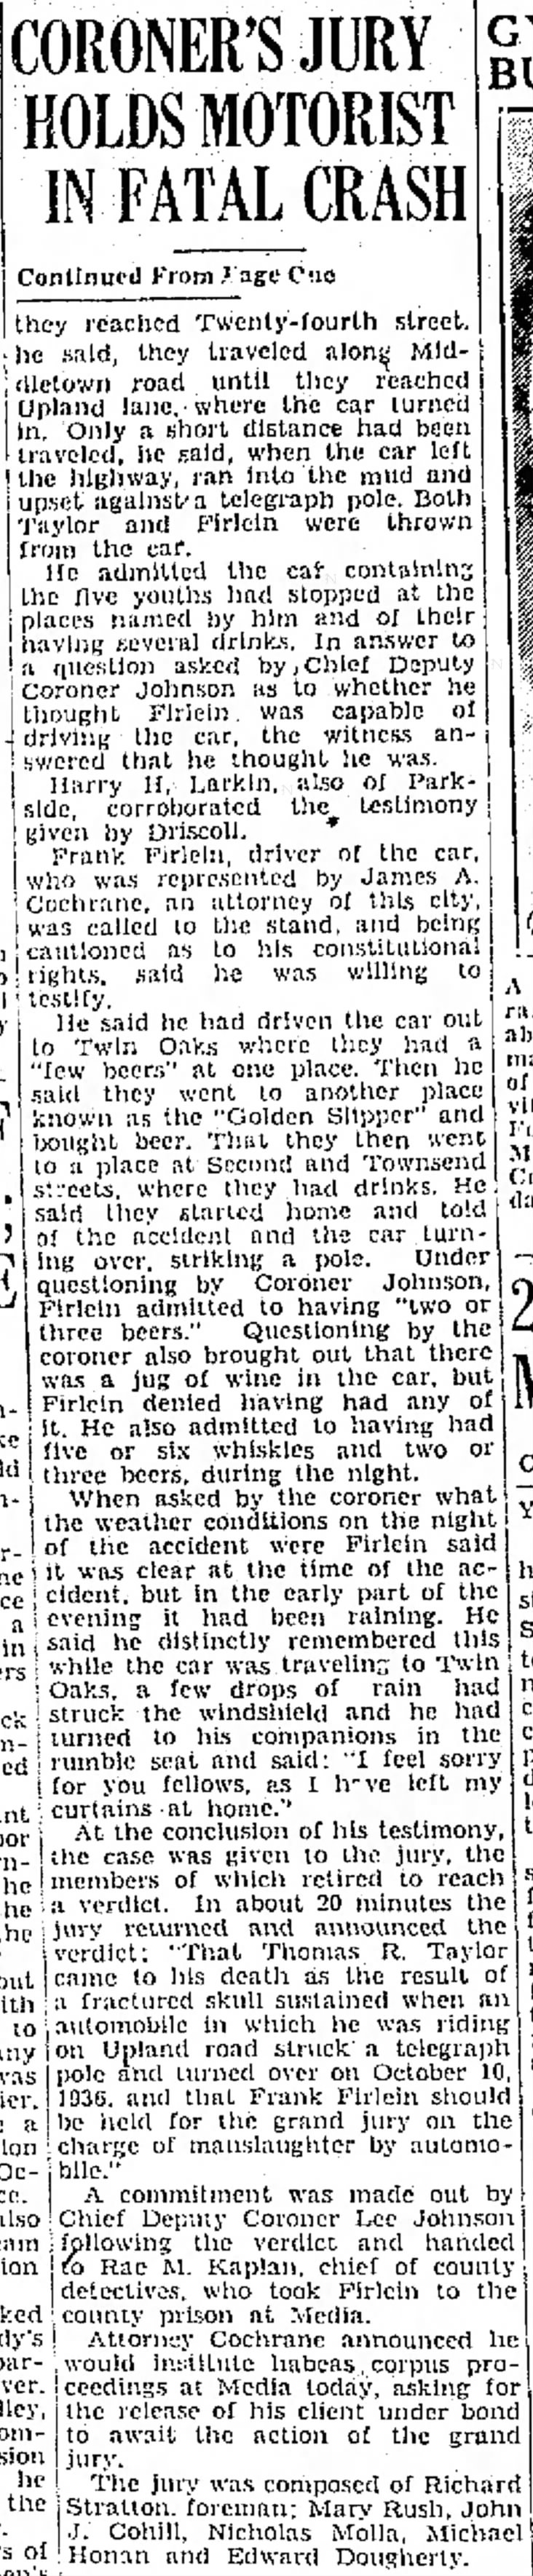 Delaware County Daily Times Chester, Pennsylvania
Friday, October 30, 1936 
contiuned